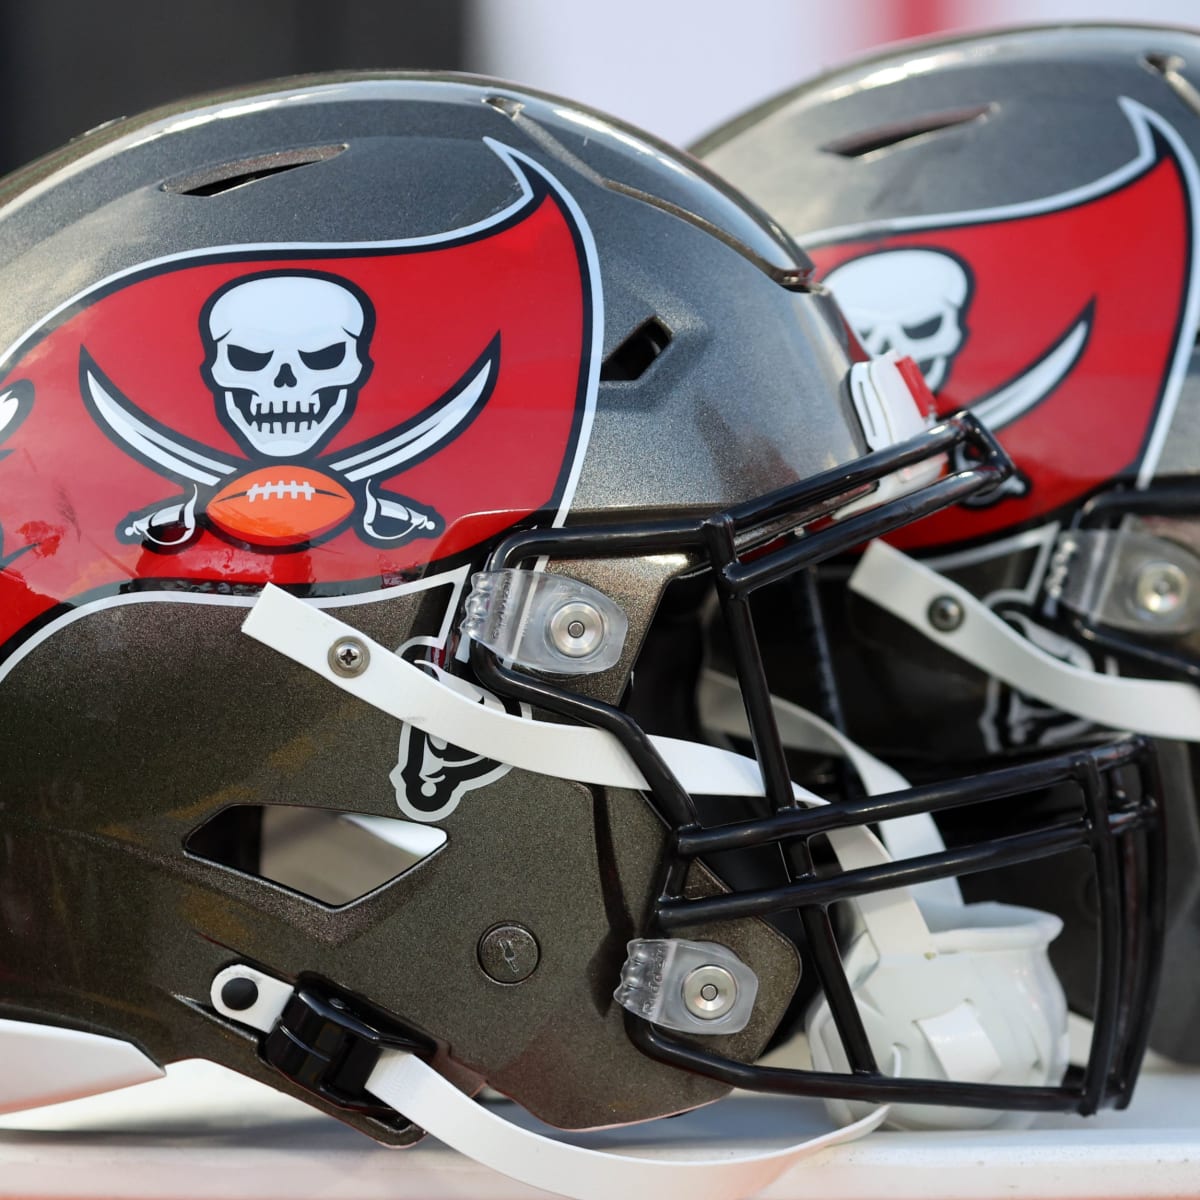 Boy tackled by security after running on field at Buccaneers game